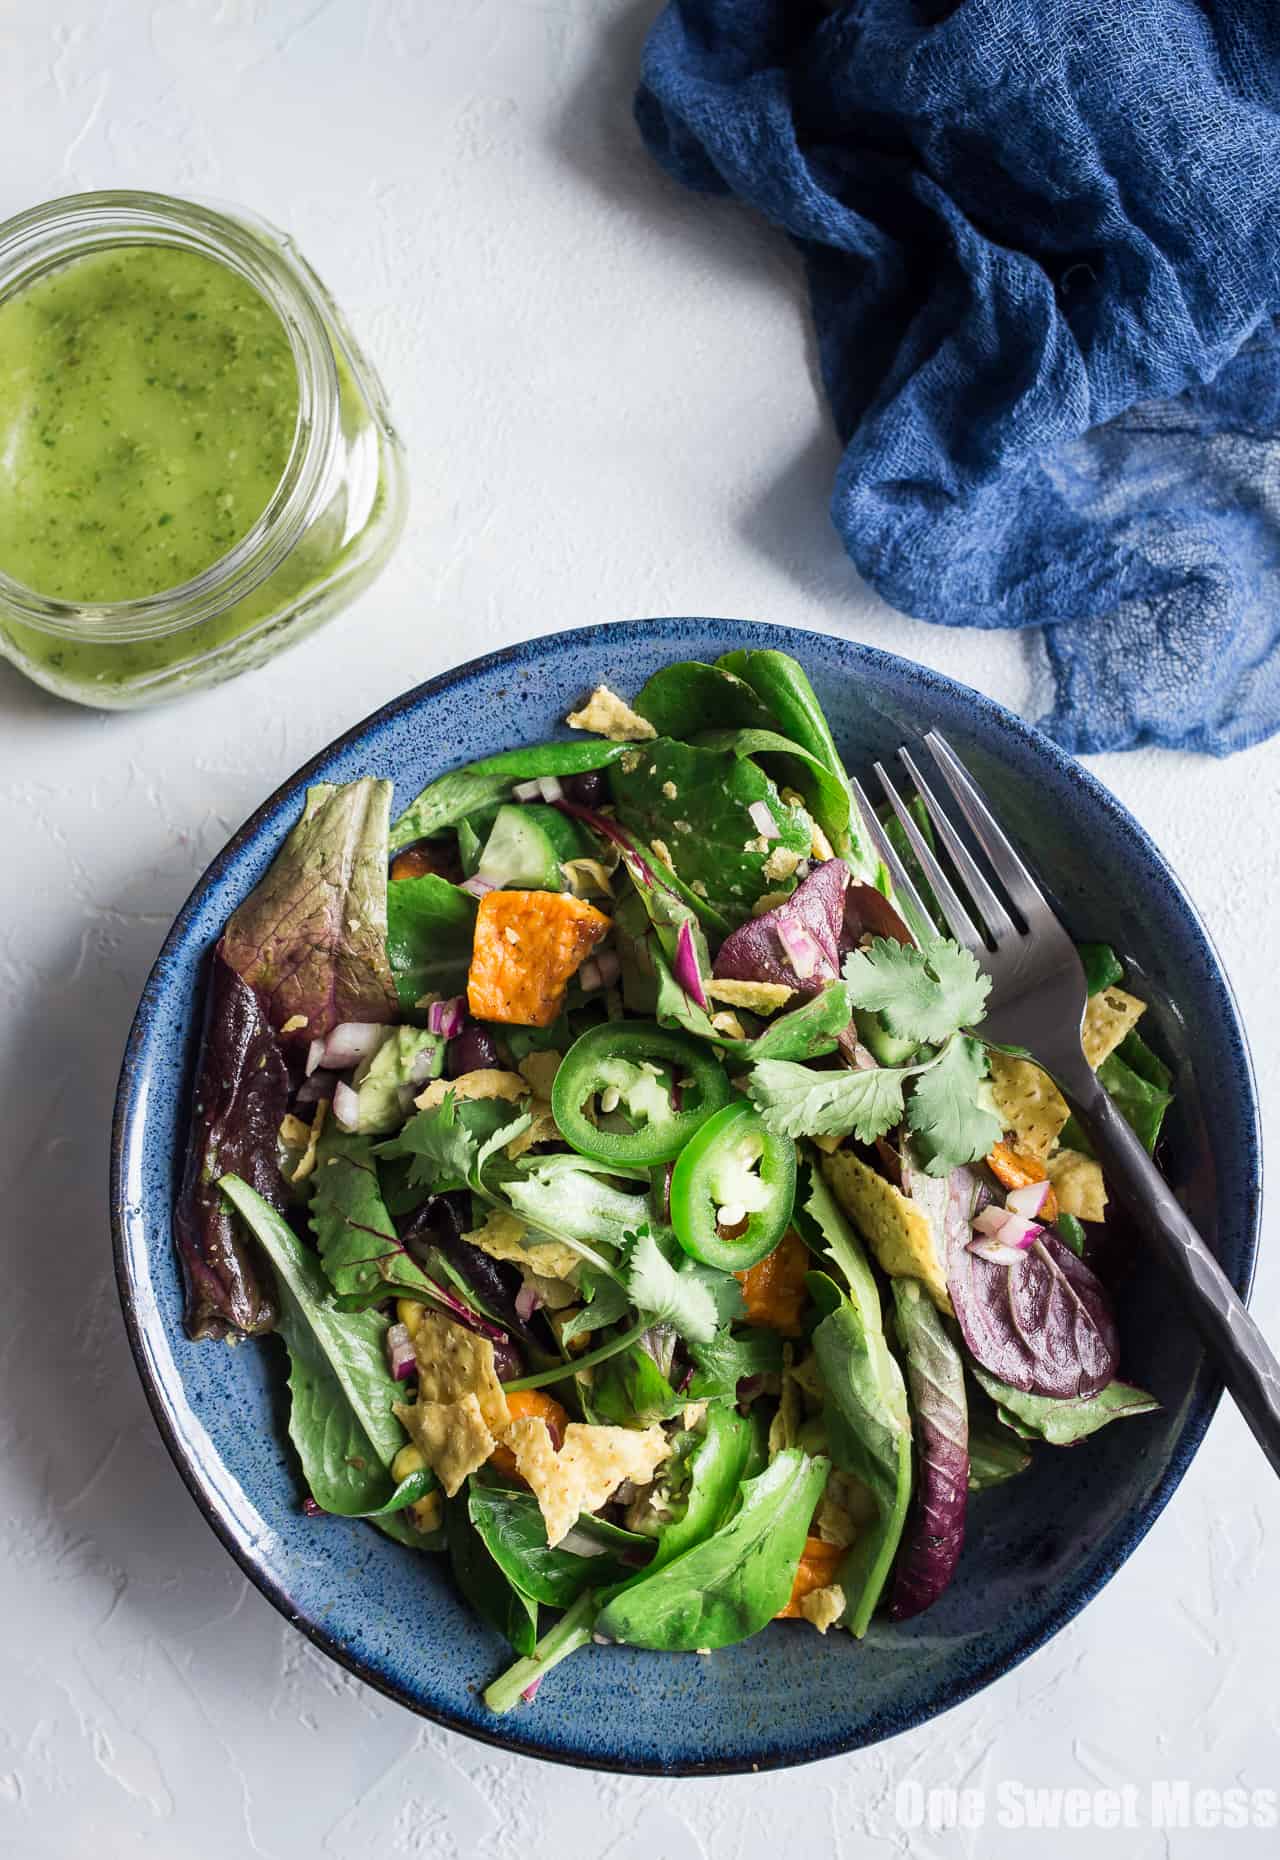 Roasted Sweet Potato and Black Bean Salad with Chili Lime Vinaigrette: This zesty salad with loaded with fresh veggies, creamy avocado, and sweet roasted corn. It's gluten-free, vegan, and super healthy! 